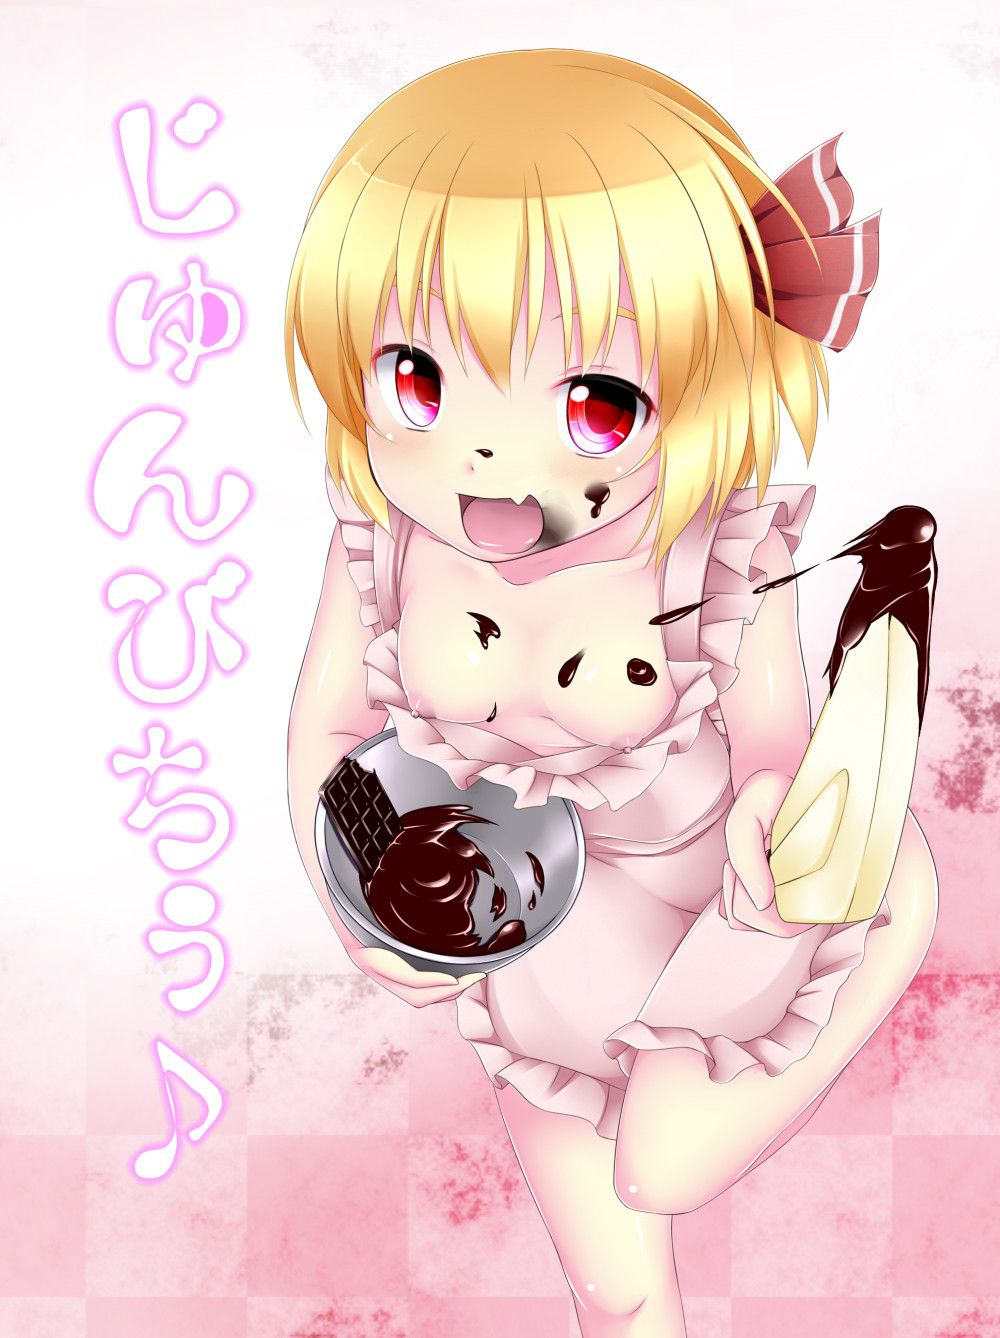 【Erotic Image】 I tried collecting images of cute Rumia, but it's too erotic ...(Tougata Project) 6